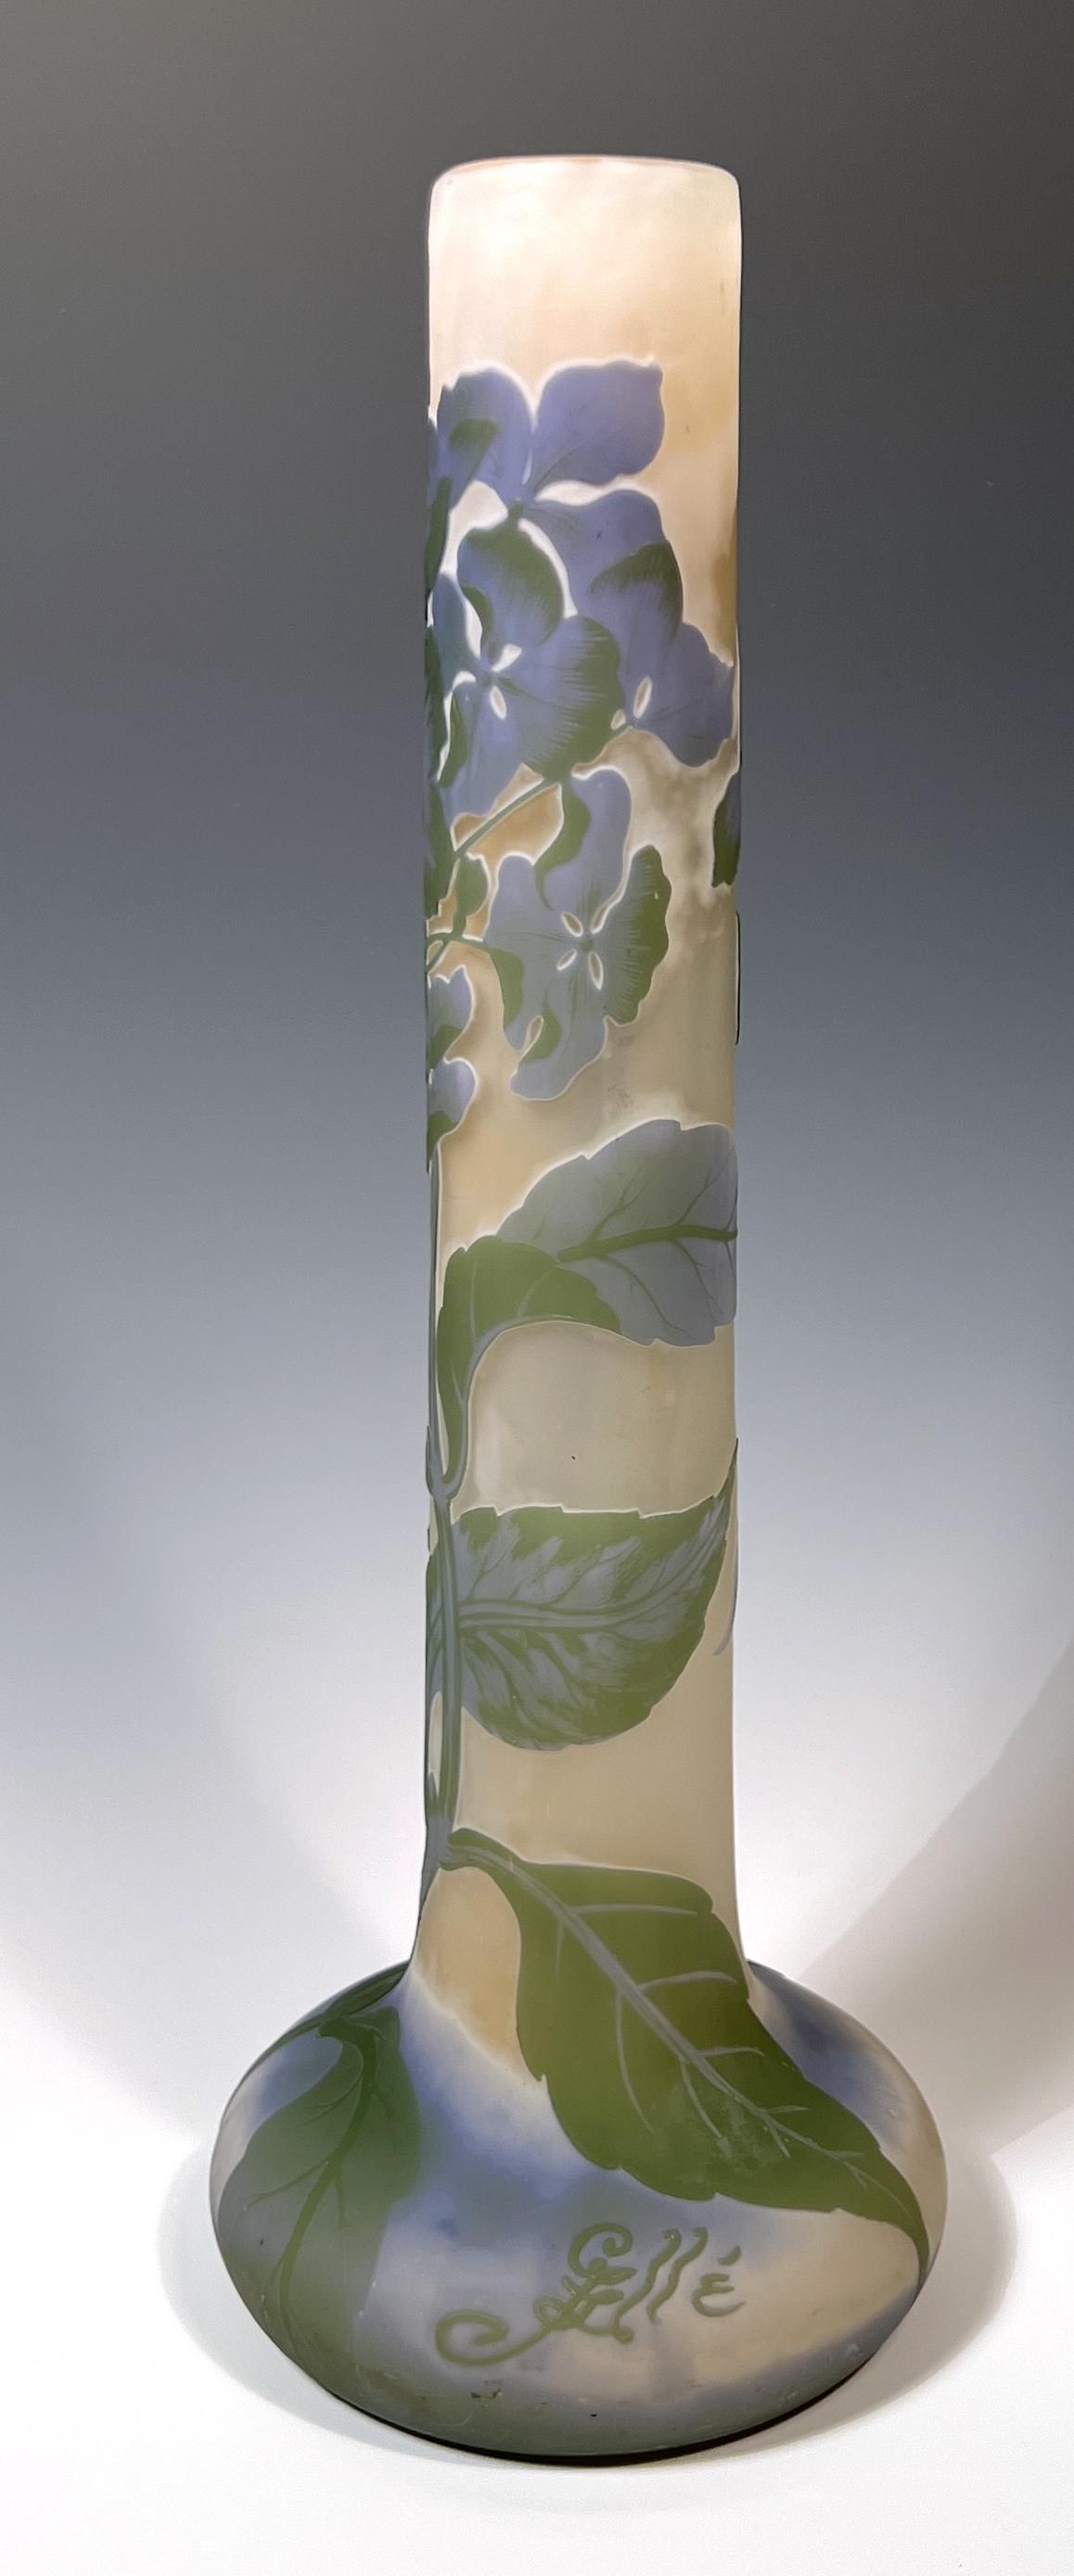 CAMEO GLASS TALL VASE SIGNED GALLE  3d22b6